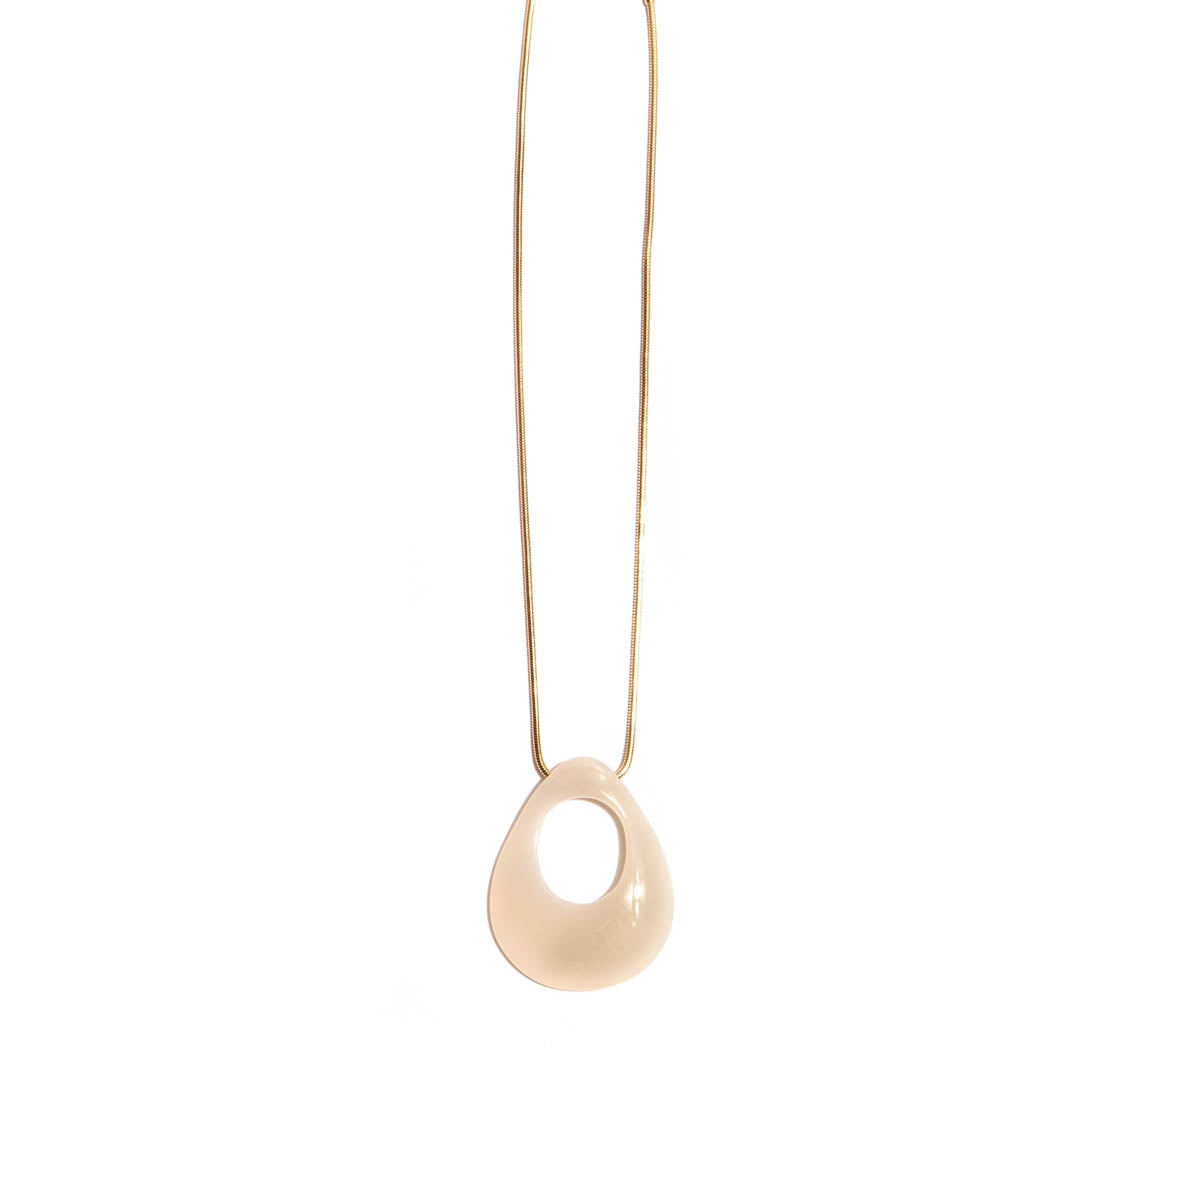 Victoria necklace drop-shaped Agate and gold-plated chain